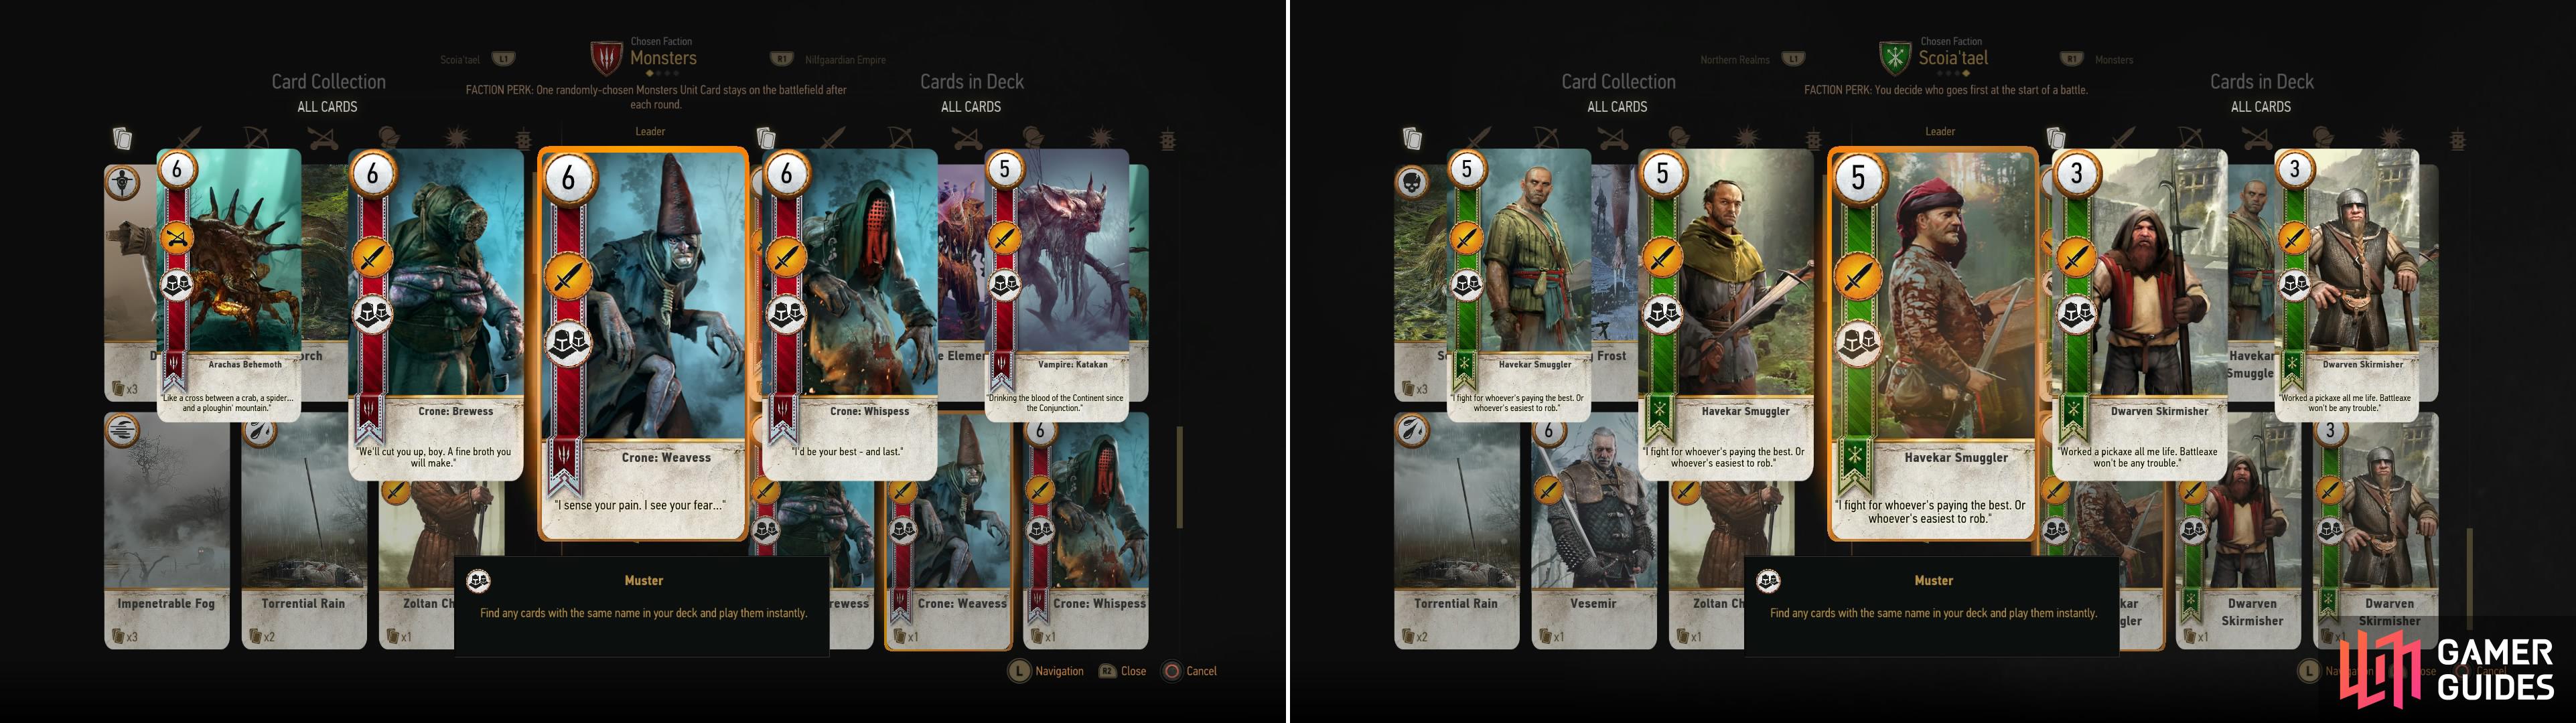 Monster decks (left) and Scoia’tael decks (right) both rely primarily on cards with the “Muster” ability to over-power opponents. Play one “Muster” card and all related “Muster” cards will automatically be put into play.